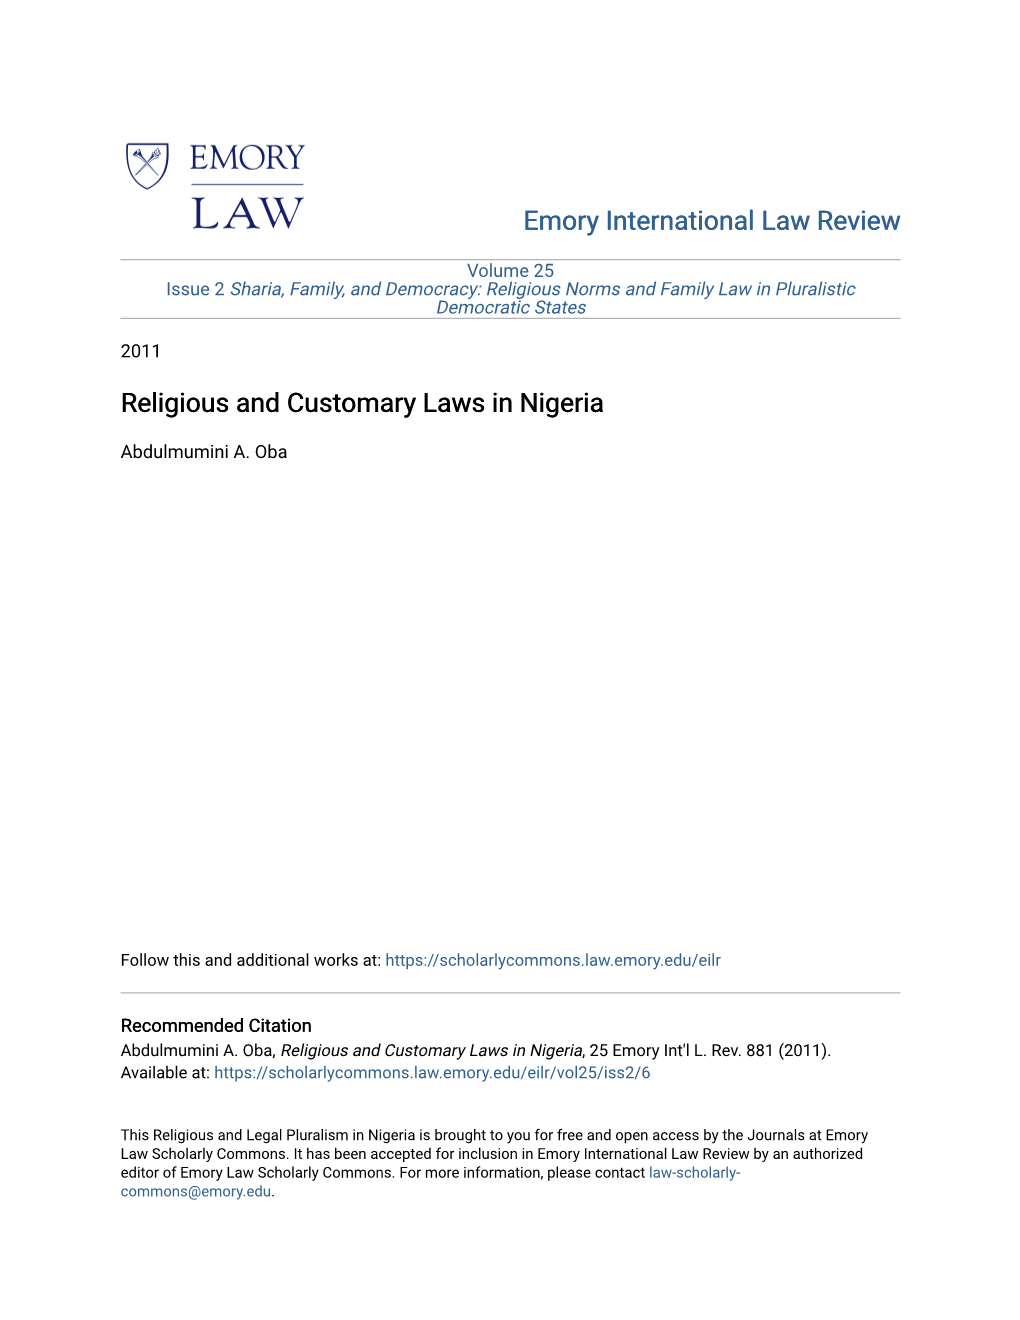 Religious and Customary Laws in Nigeria